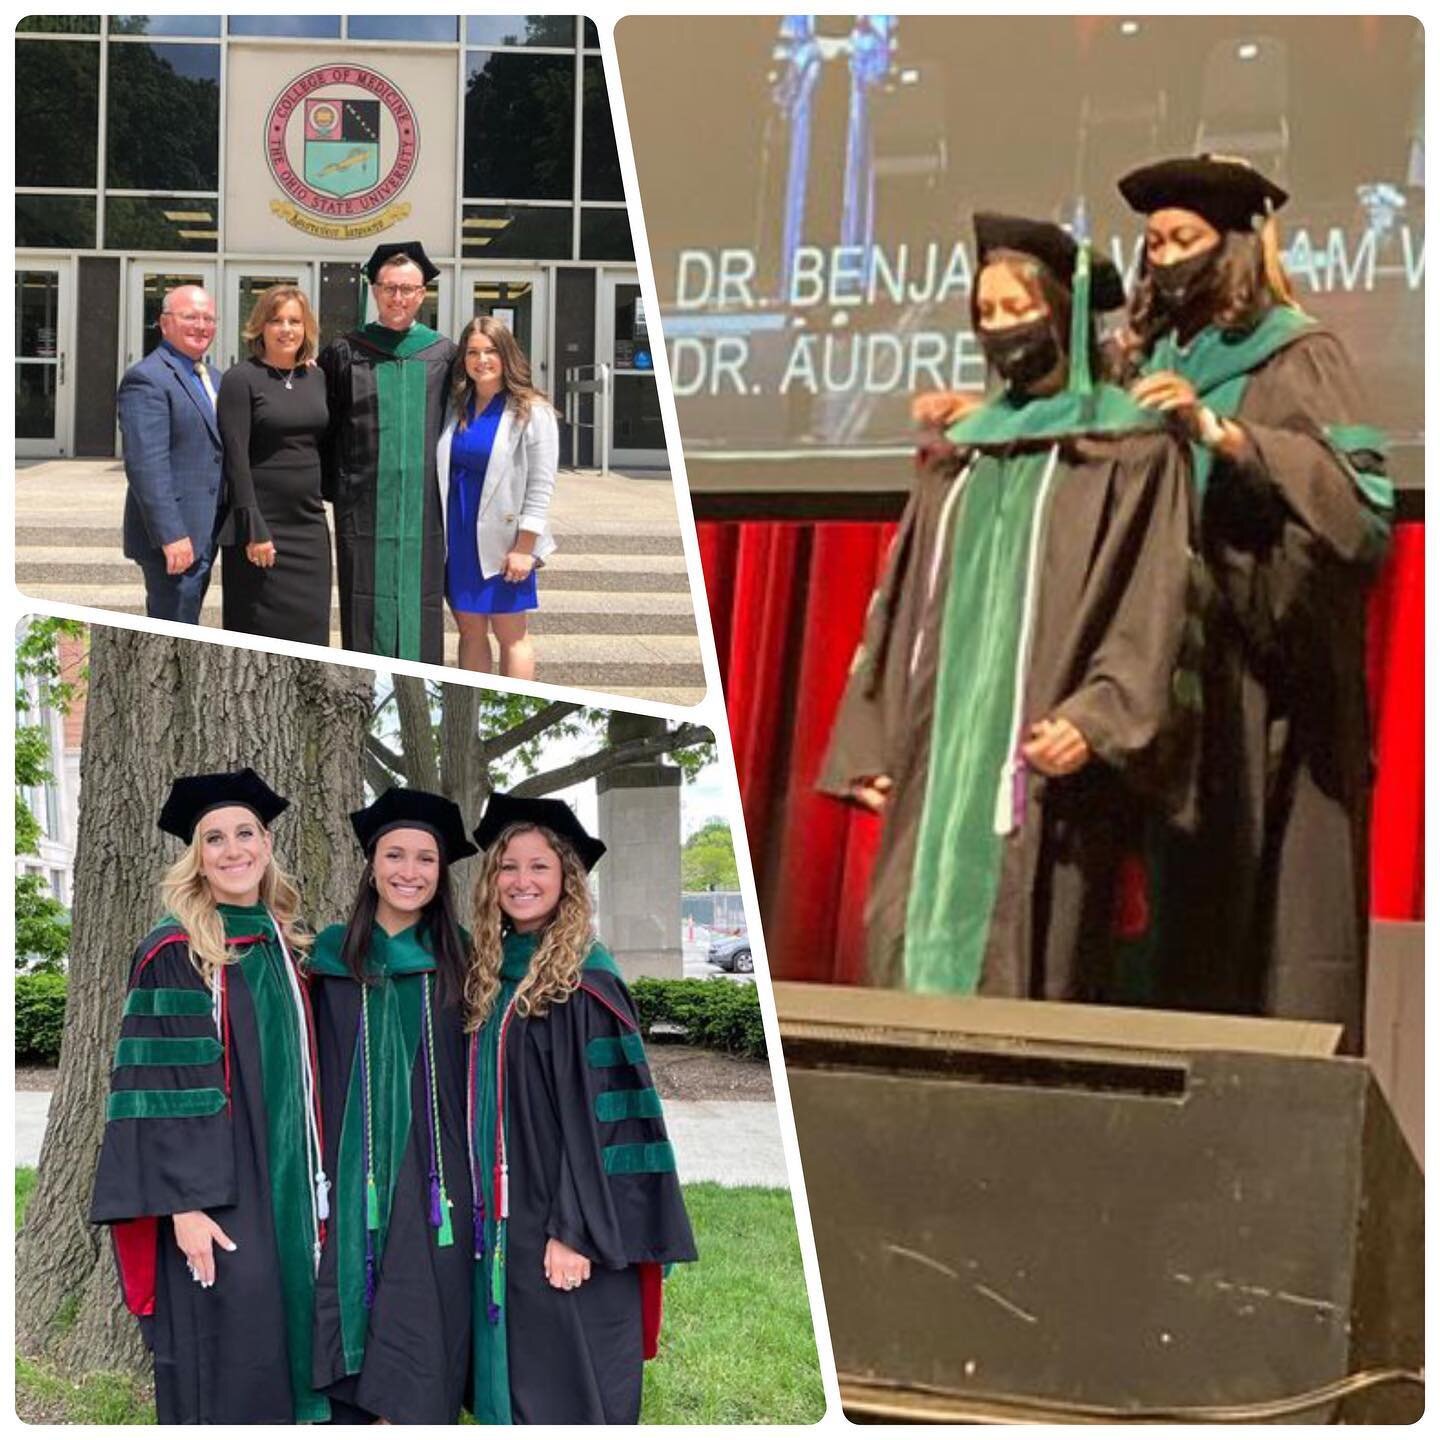 This weekend, we celebrated the beginning of a new chapter in the lives of many of our outstanding classmates. These graduating individuals are some of the most intelligent, compassionate, and resilient people that have walked the halls of OSUCOM, an